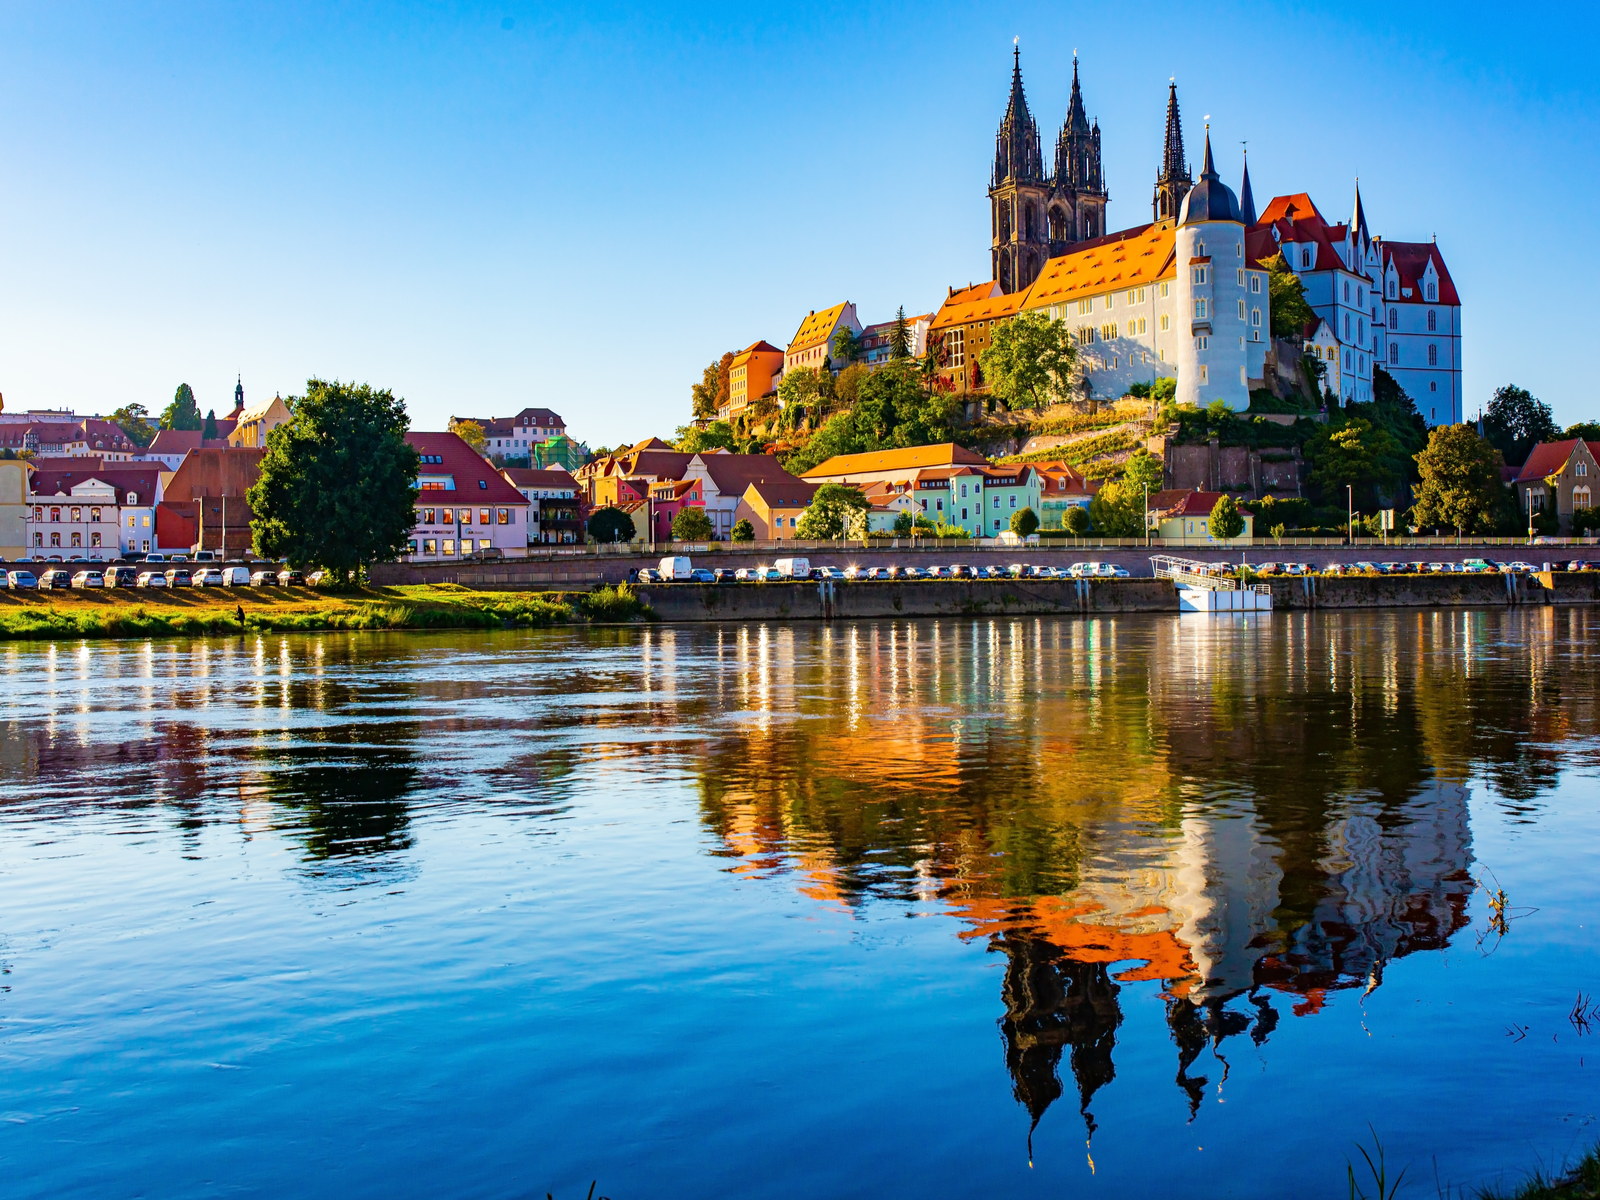 The Albrechtsburg Castle, titled as one of the best castles in Germany, and the town structures at Meissen reflected on the calm Elbe River